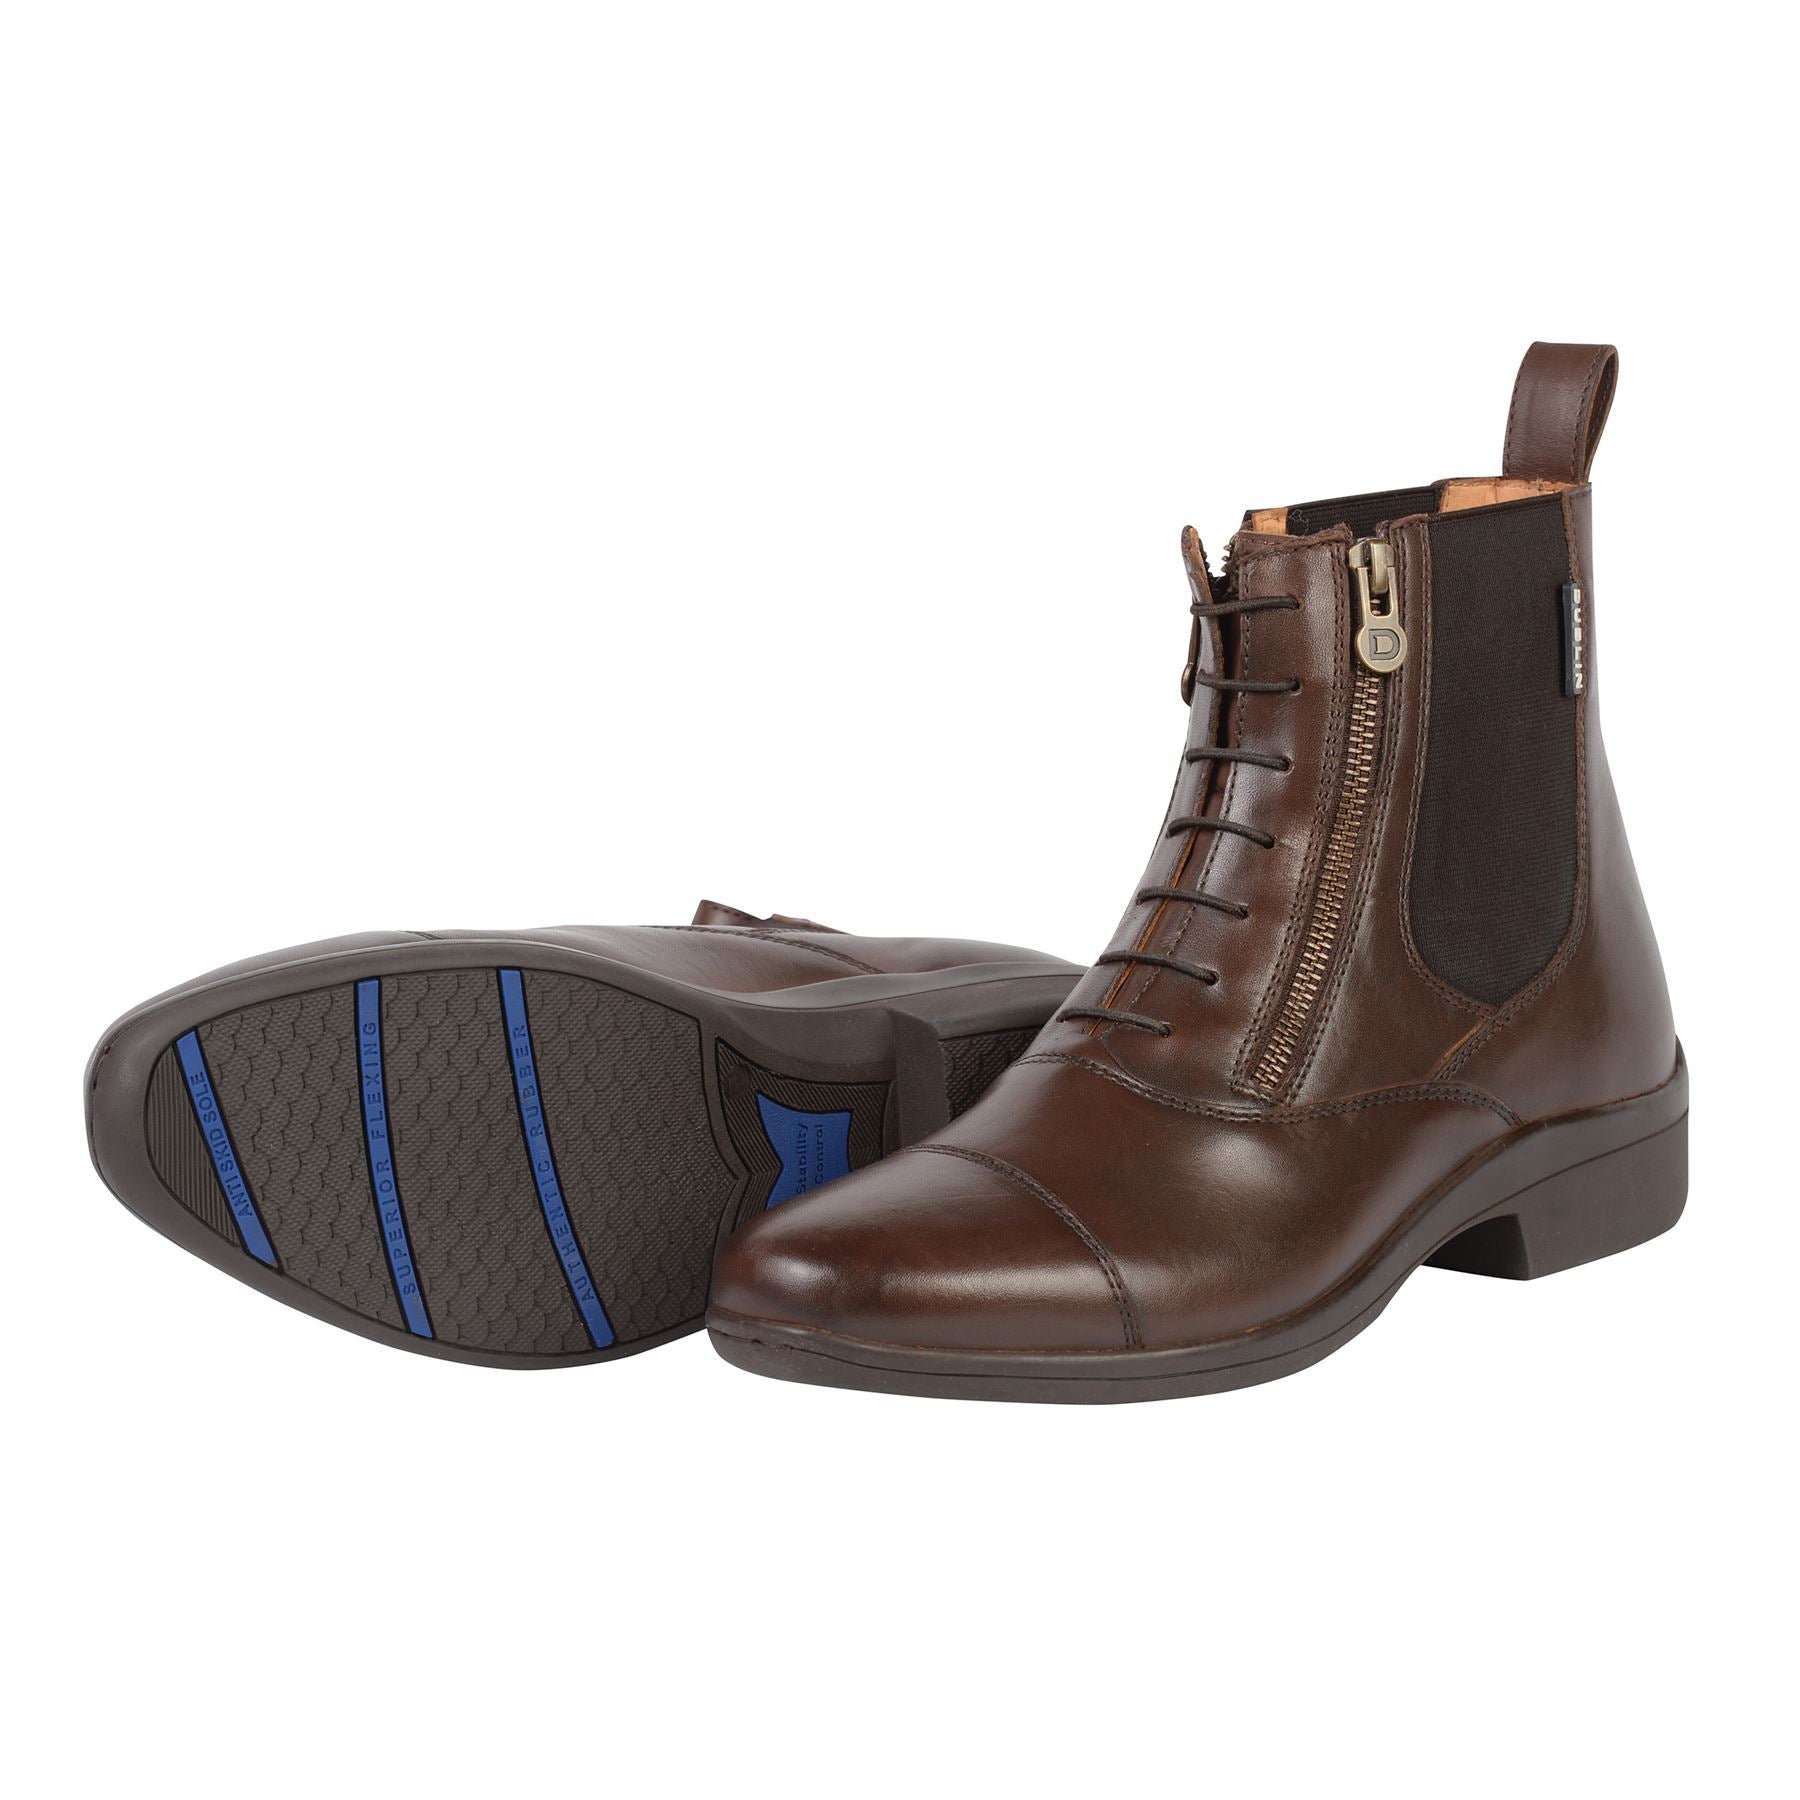 Dublin Paramount Side Zip Boots - Just Horse Riders